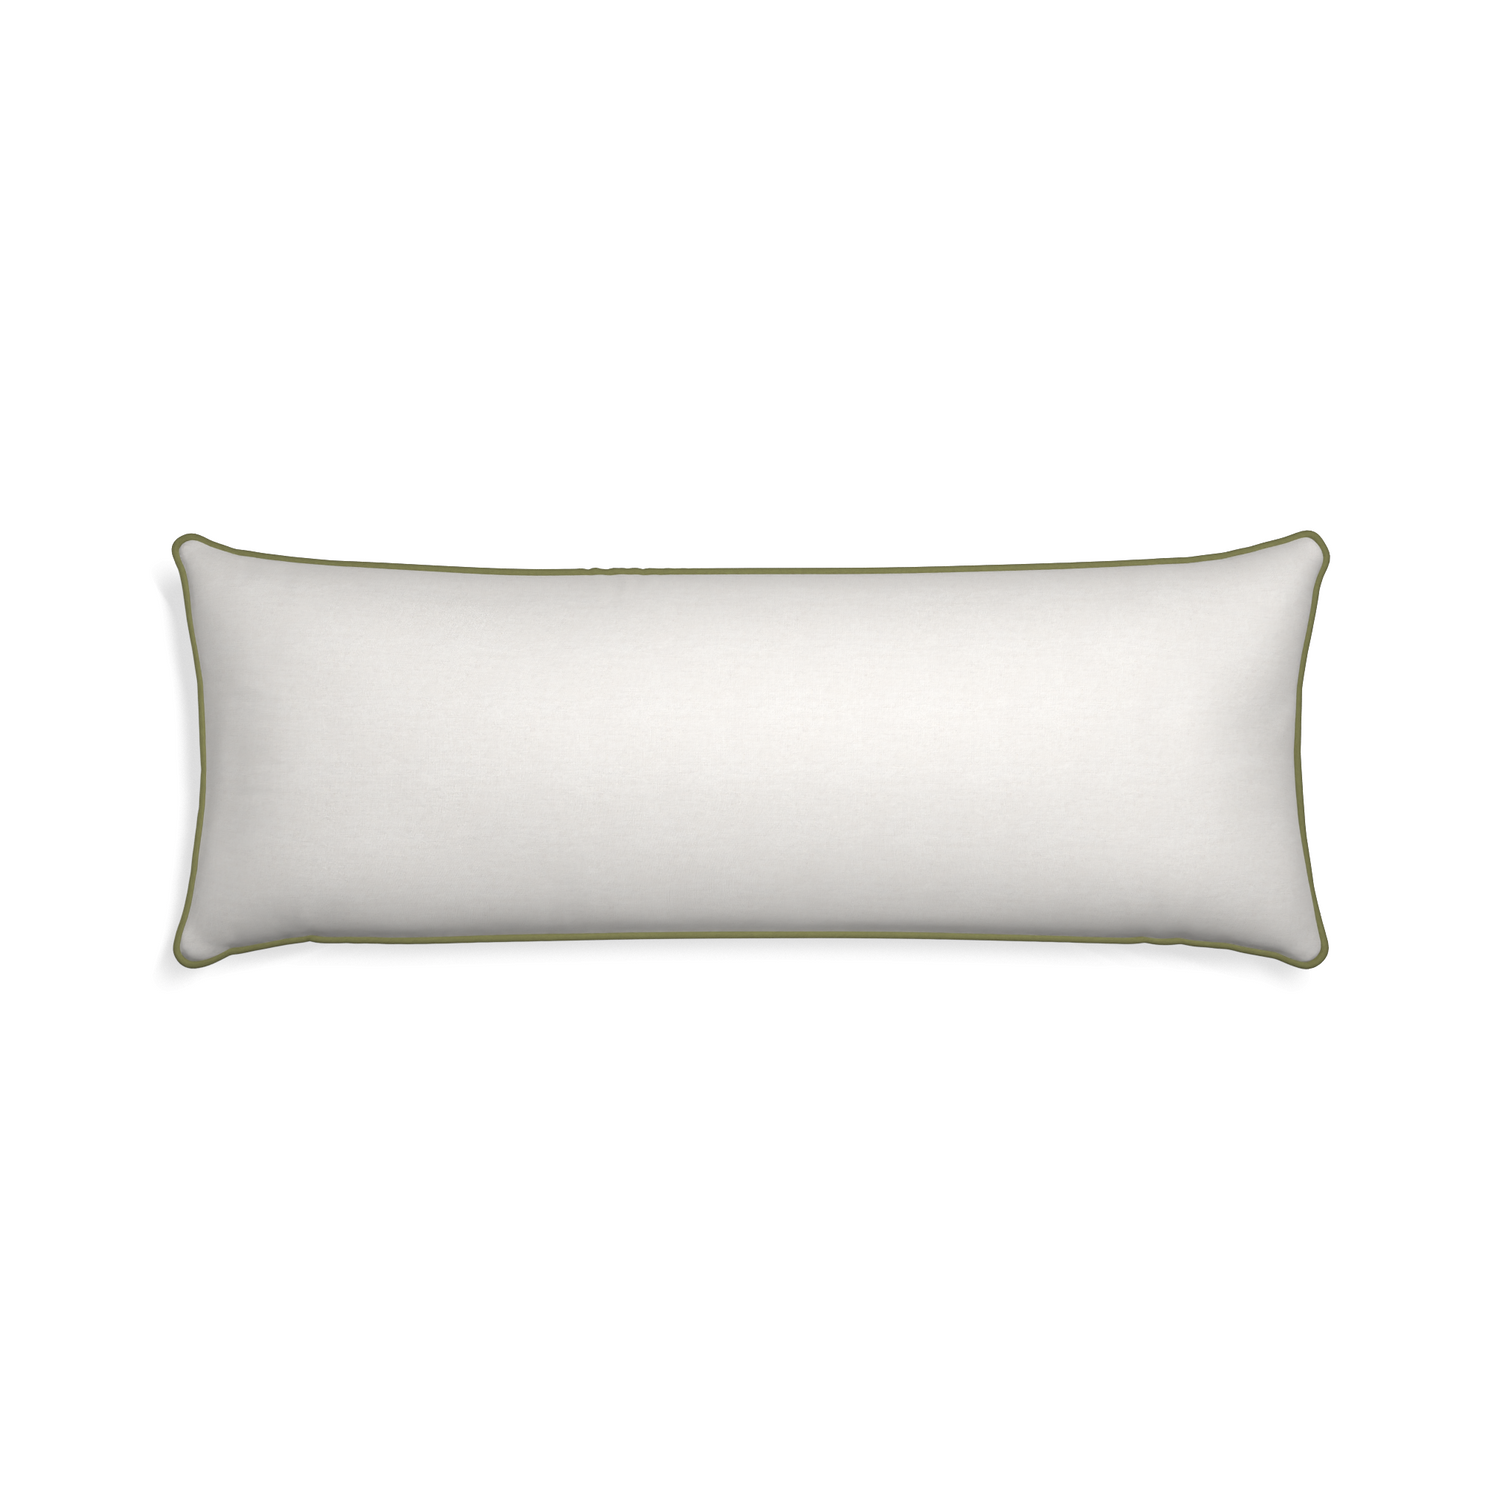 rectangle natural white pillow with moss green piping